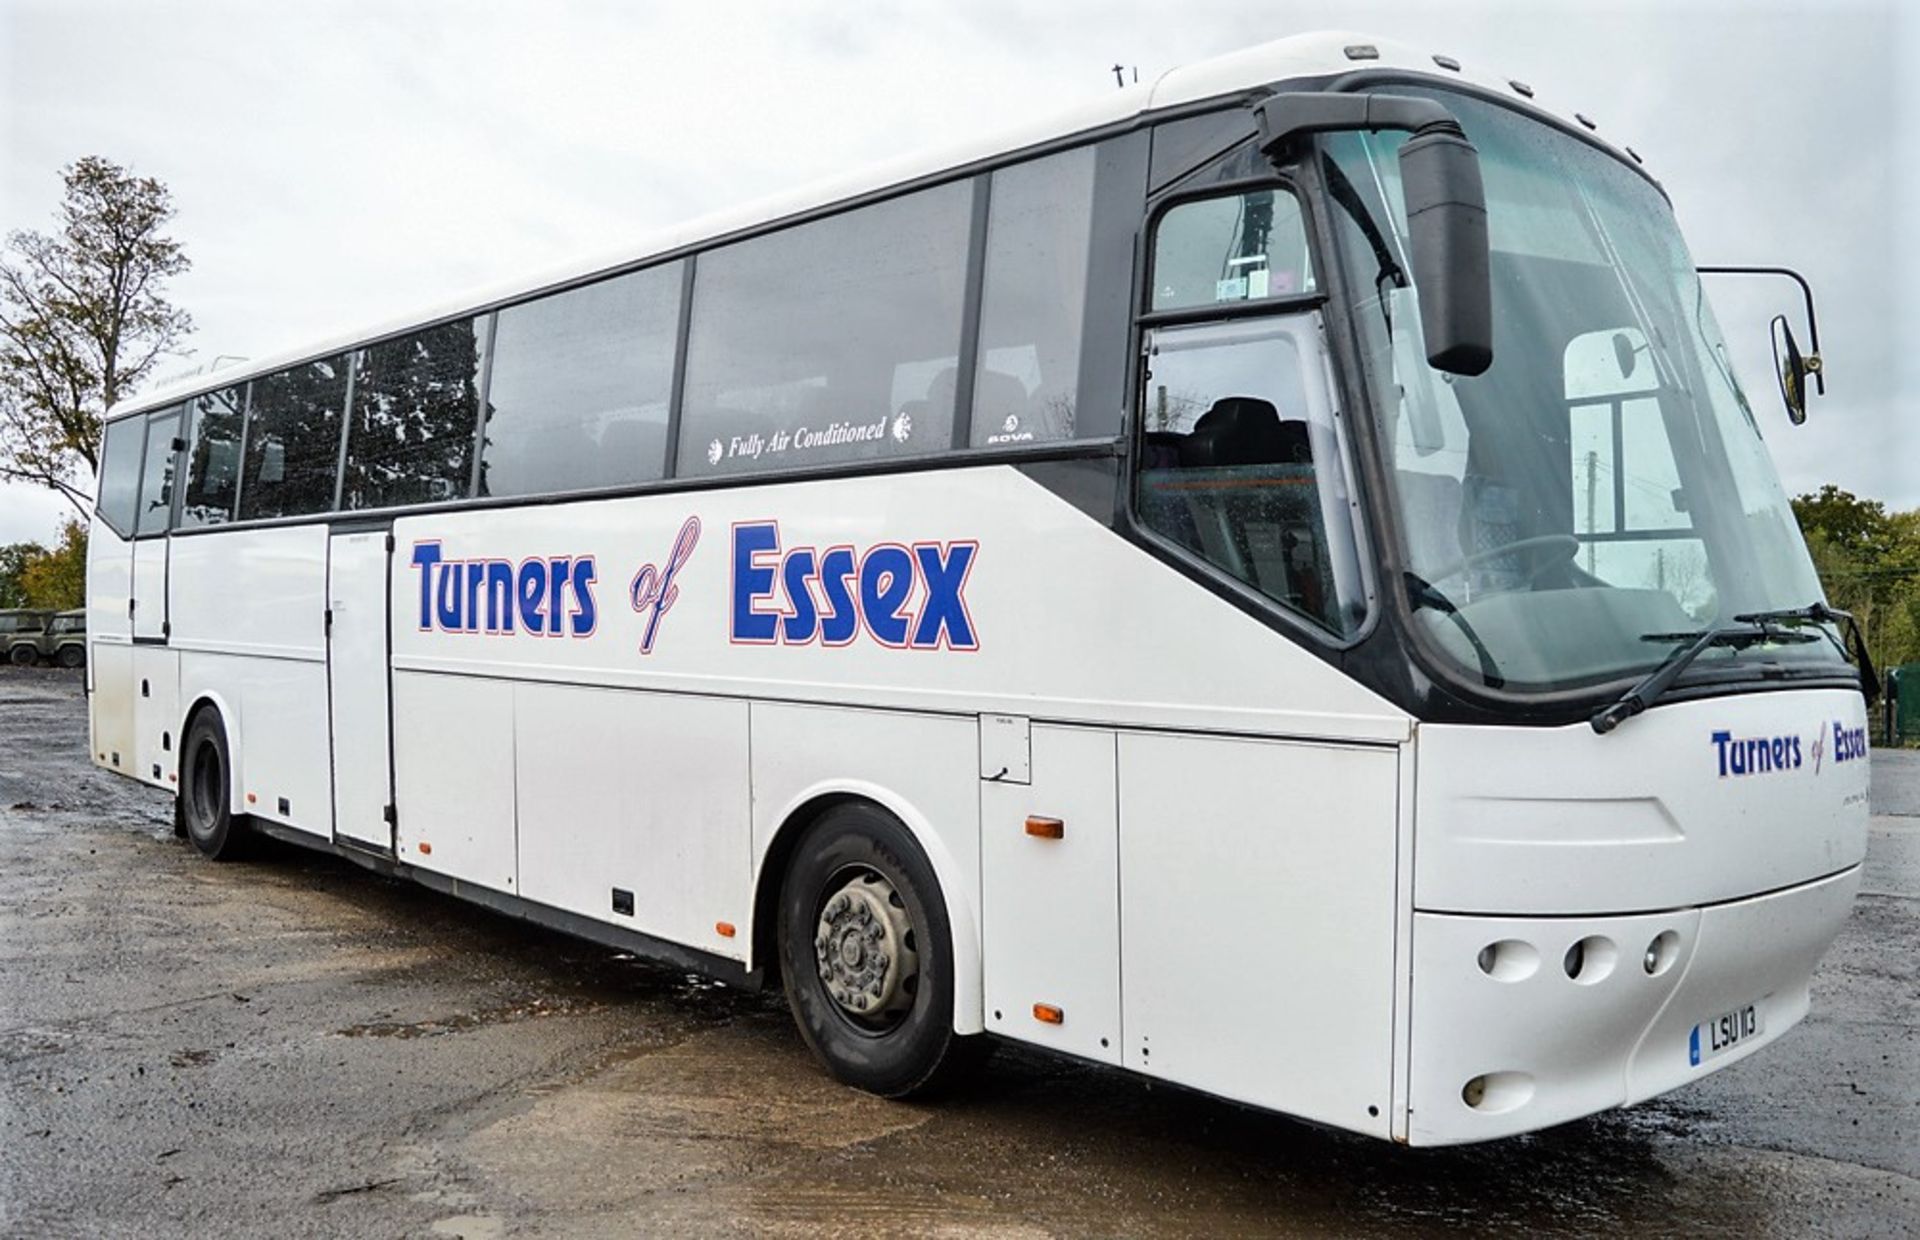 Bova Futura FH 55 seat luxury coach Registration Number: LSU 113 (Retained. The coach will be